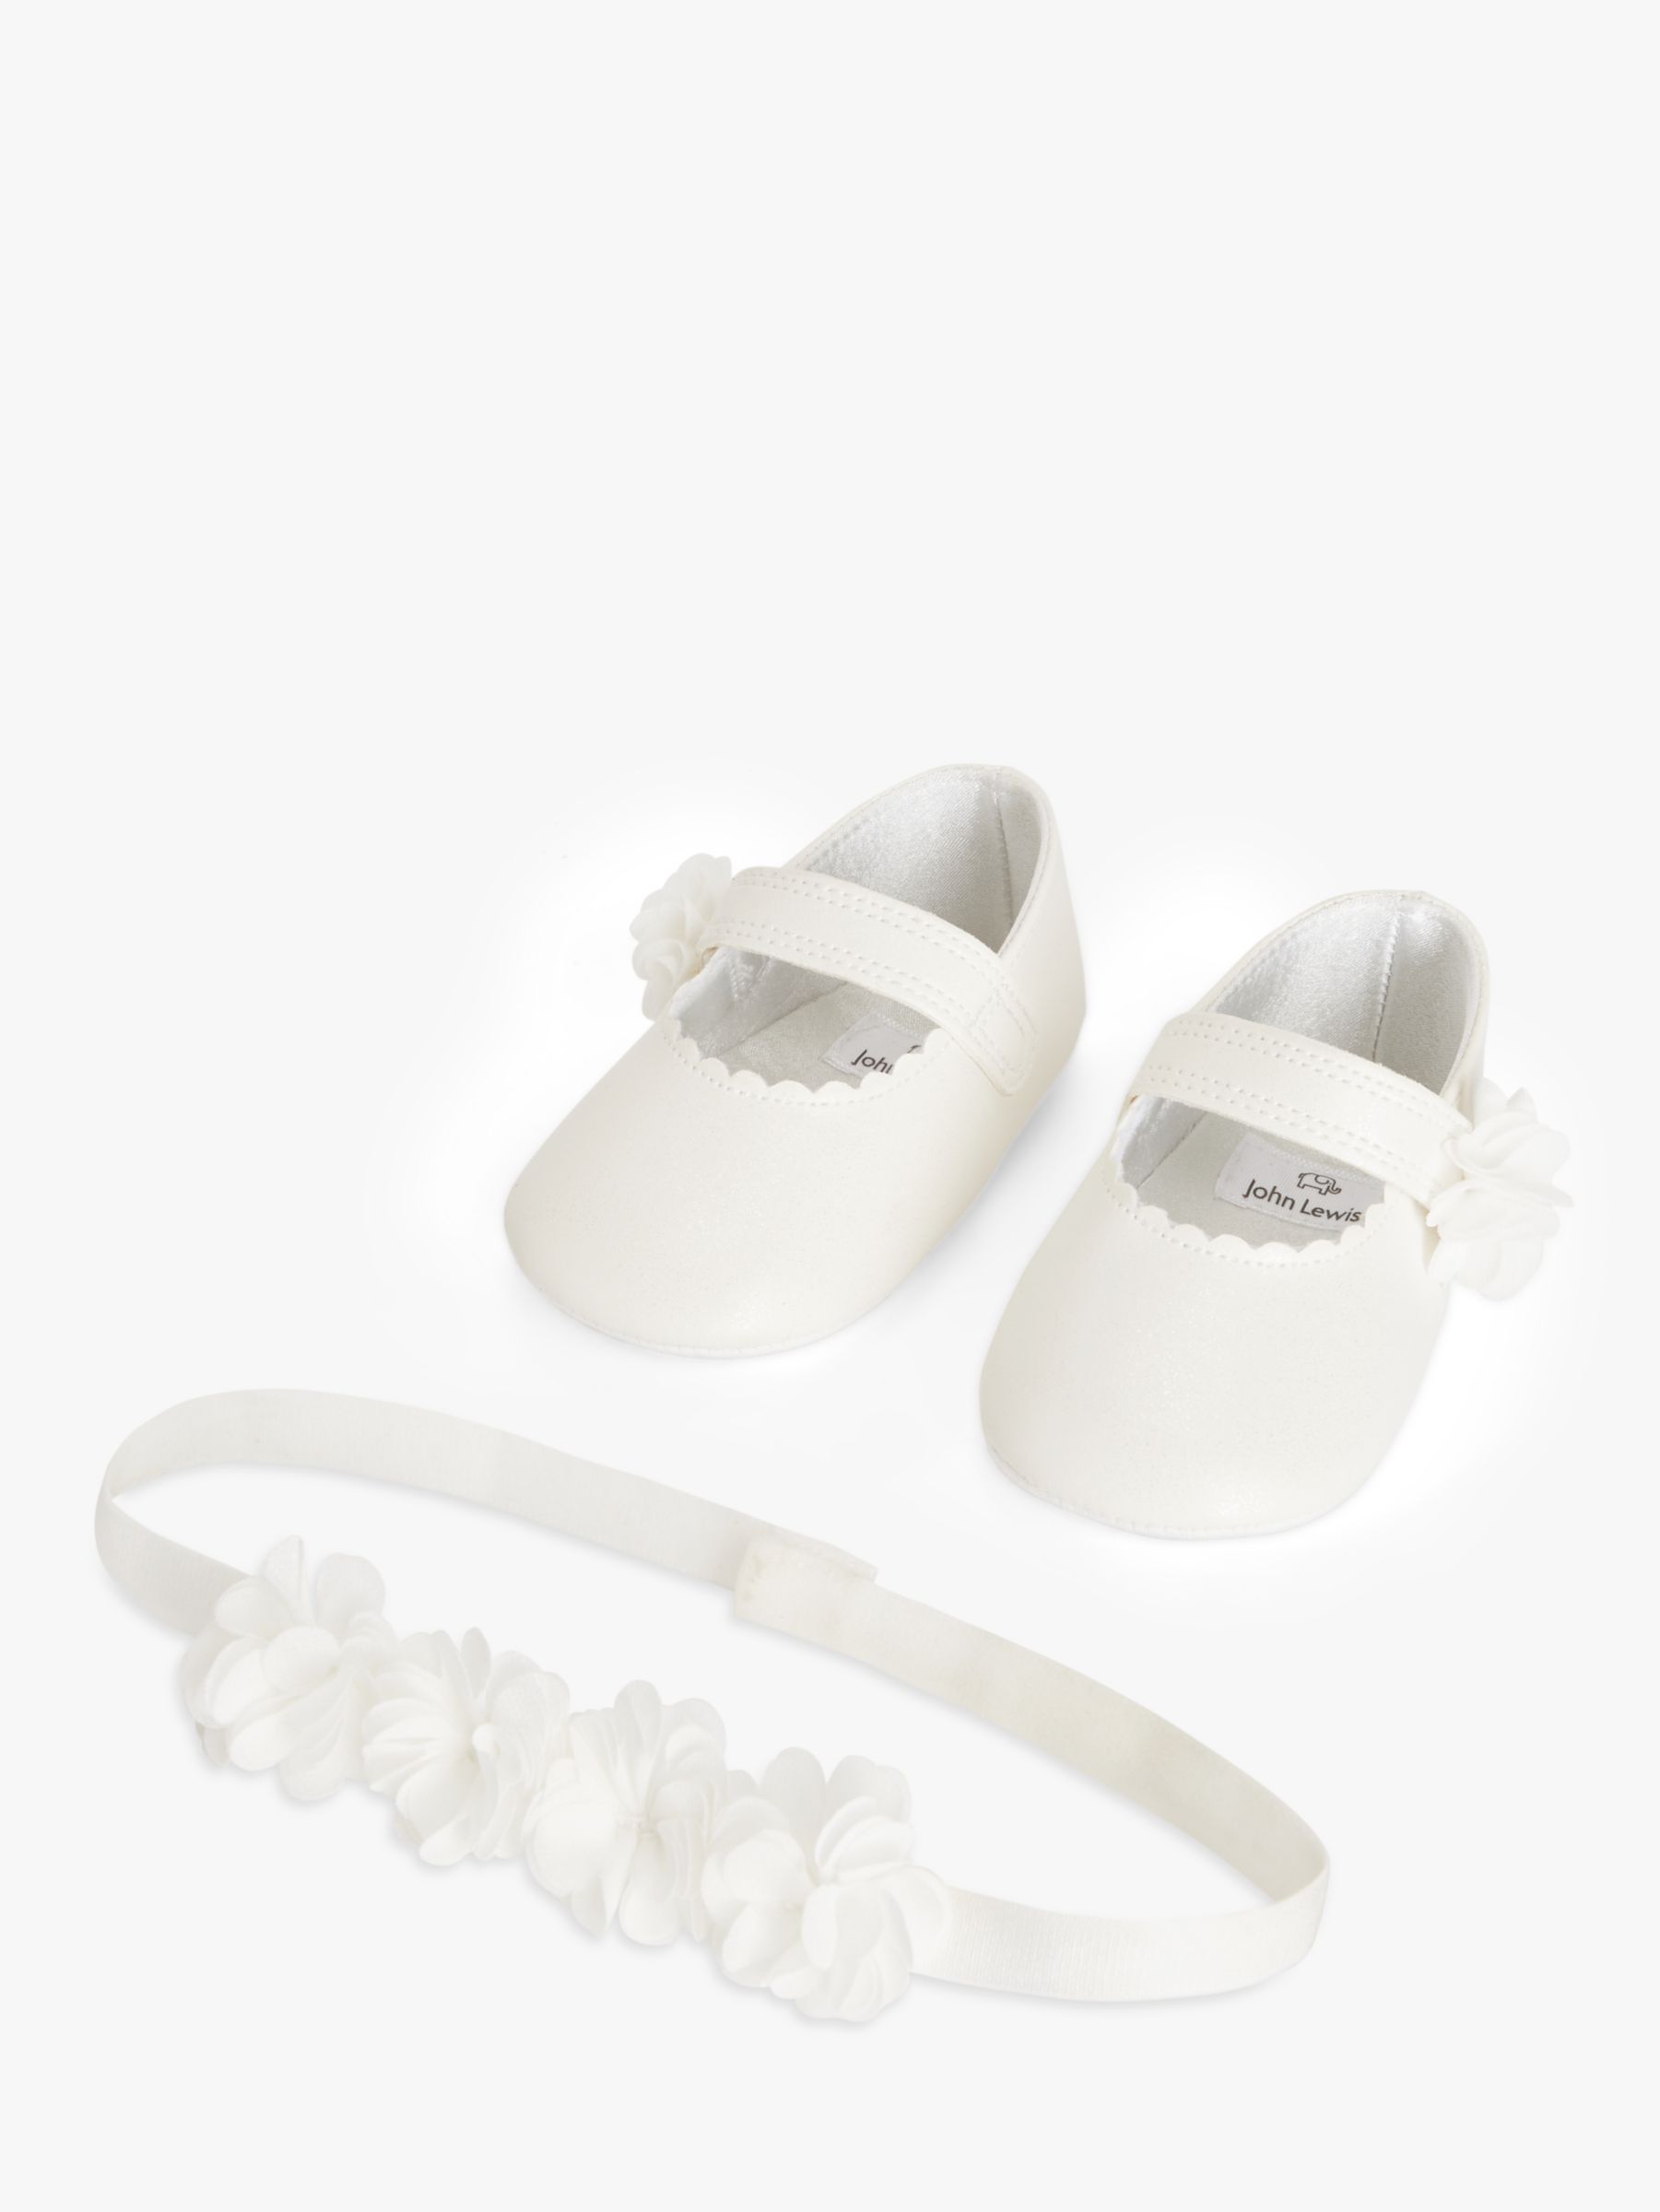 John Lewis Baby Christening Shoes and Headband Set, White, 0-3 months